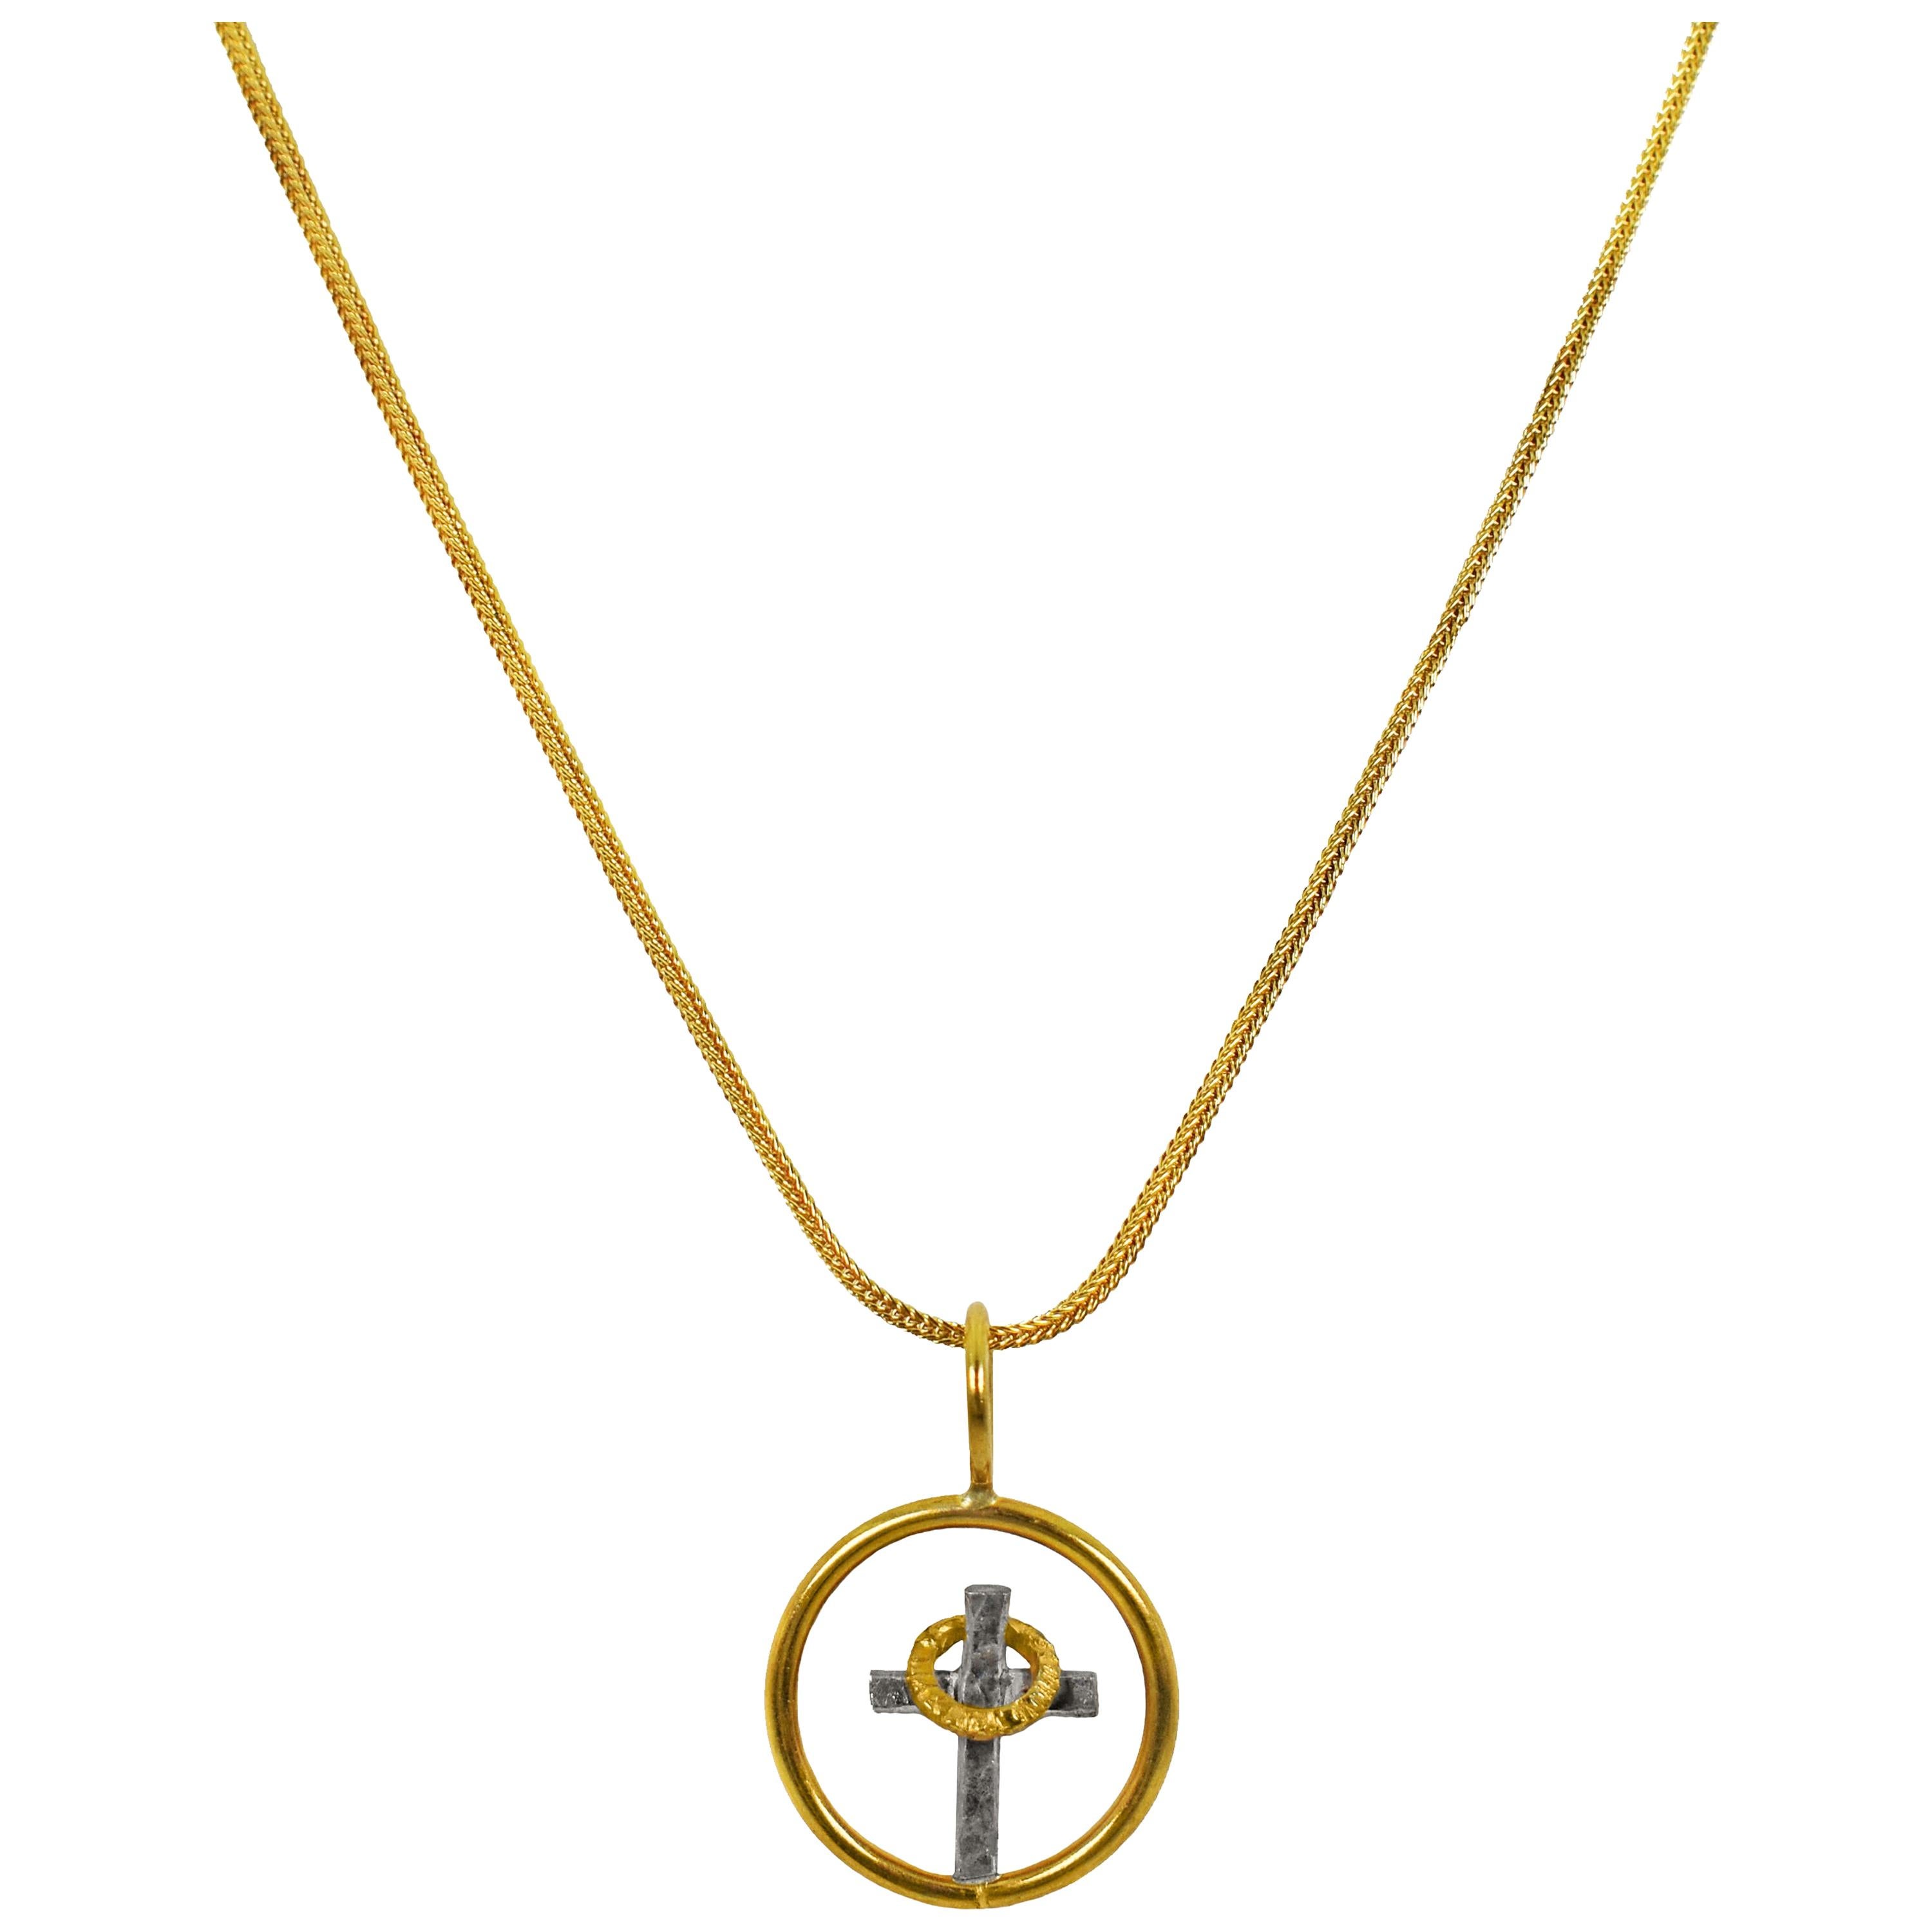 God So Loved the World, Stories in a Circle 22k Gold Two-Tone Pendant Necklace